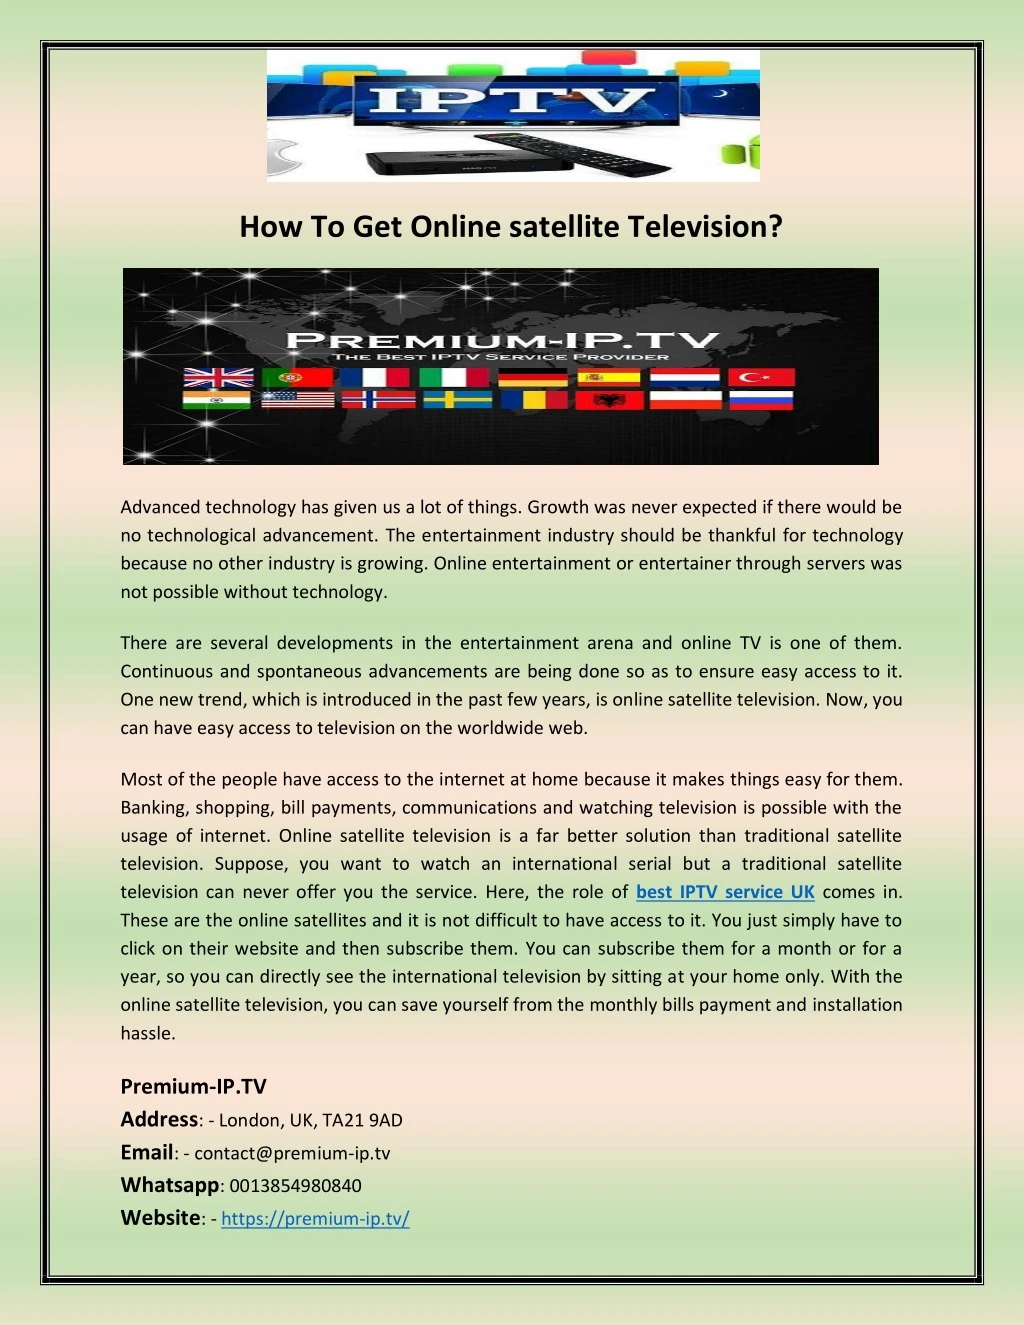 how to get online satellite television